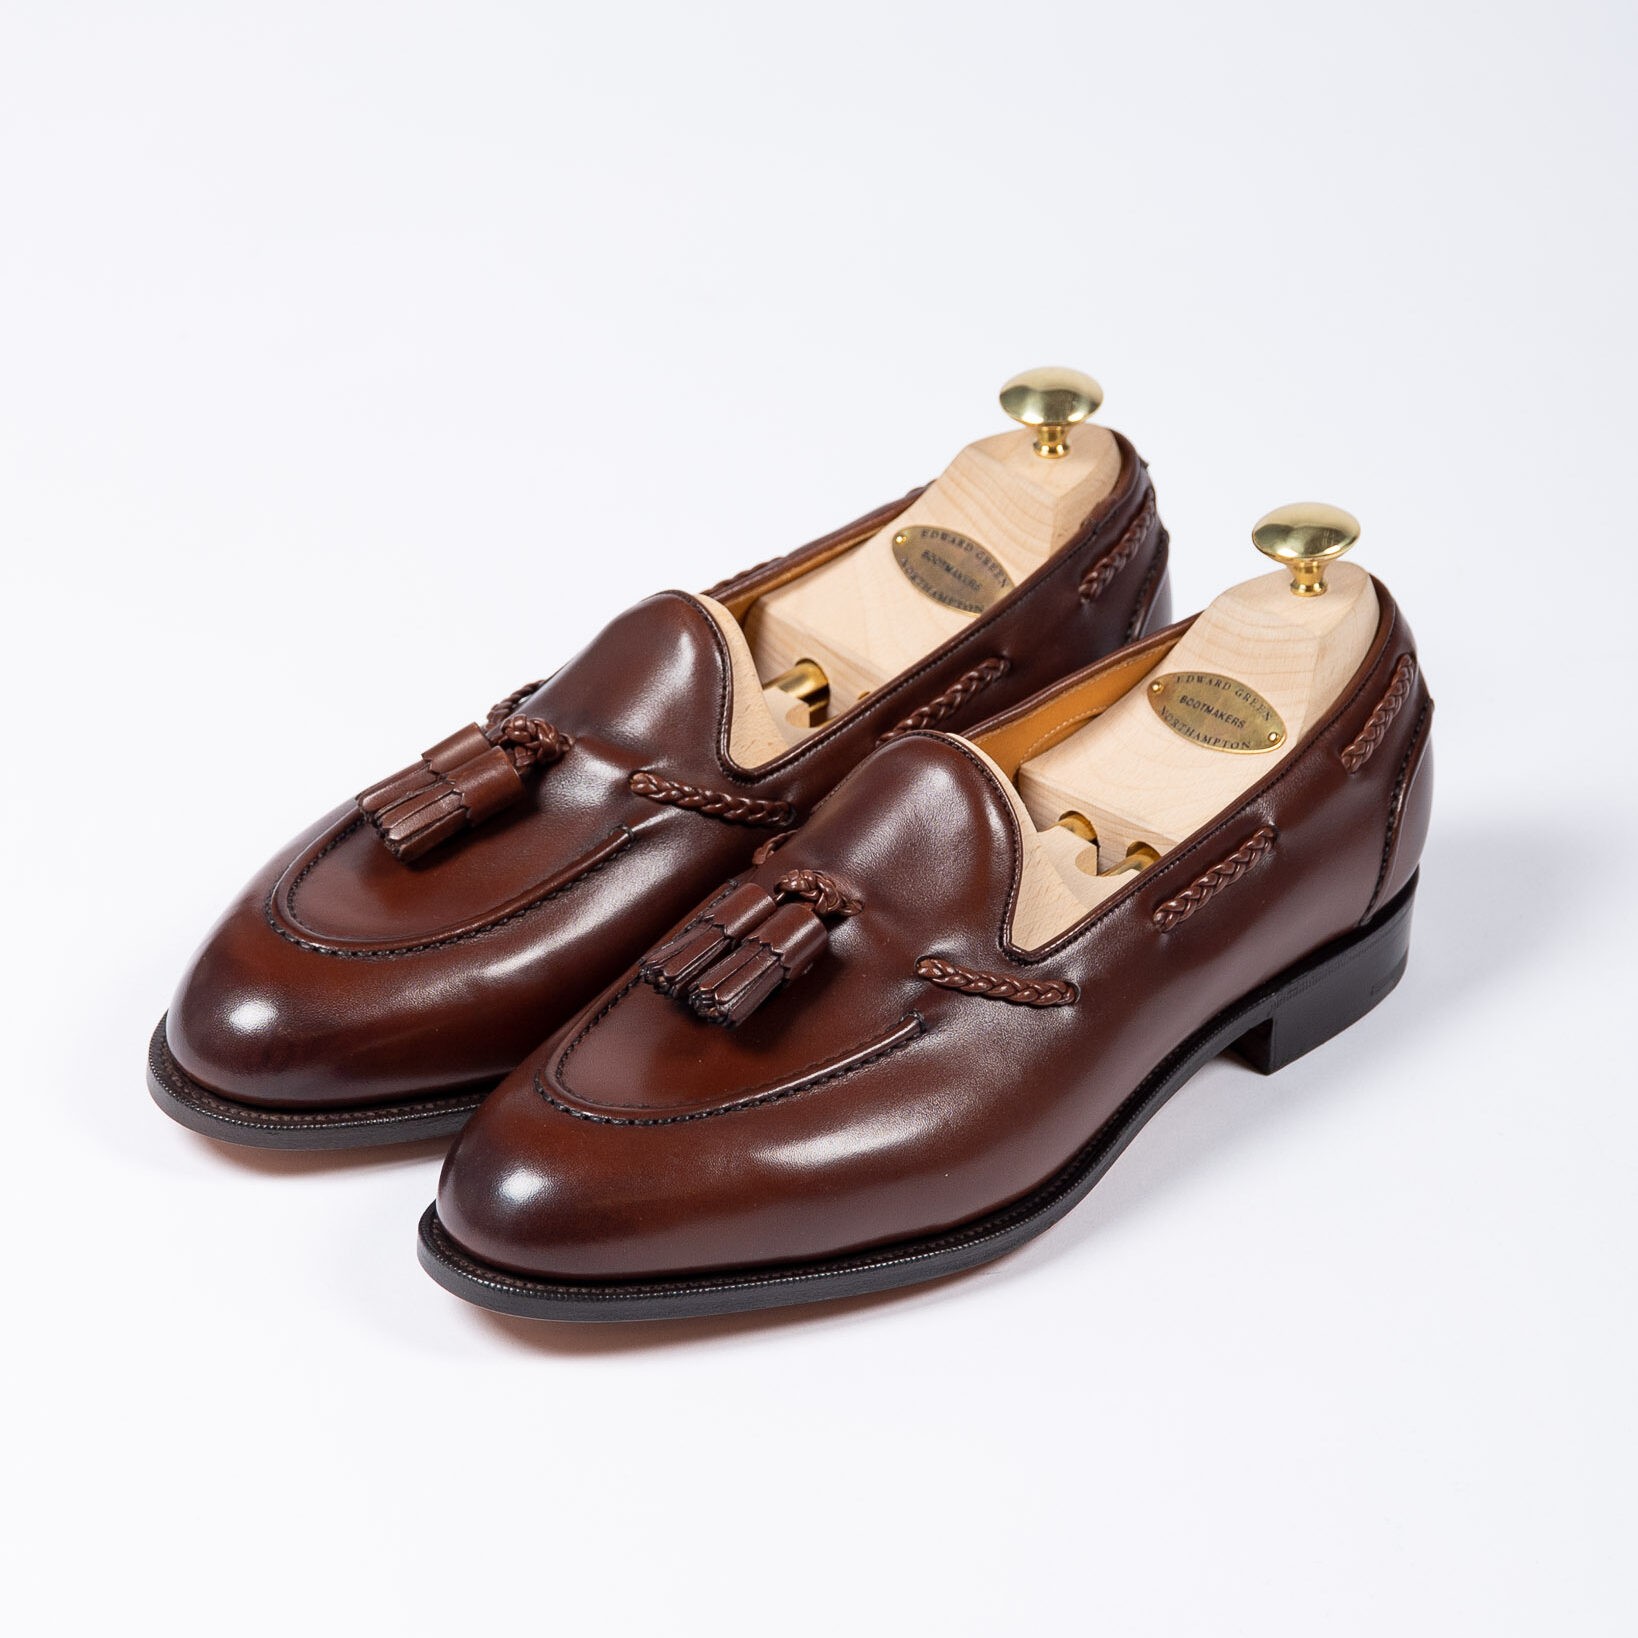 What’s the Best Tassel Loafer for Your Budget?